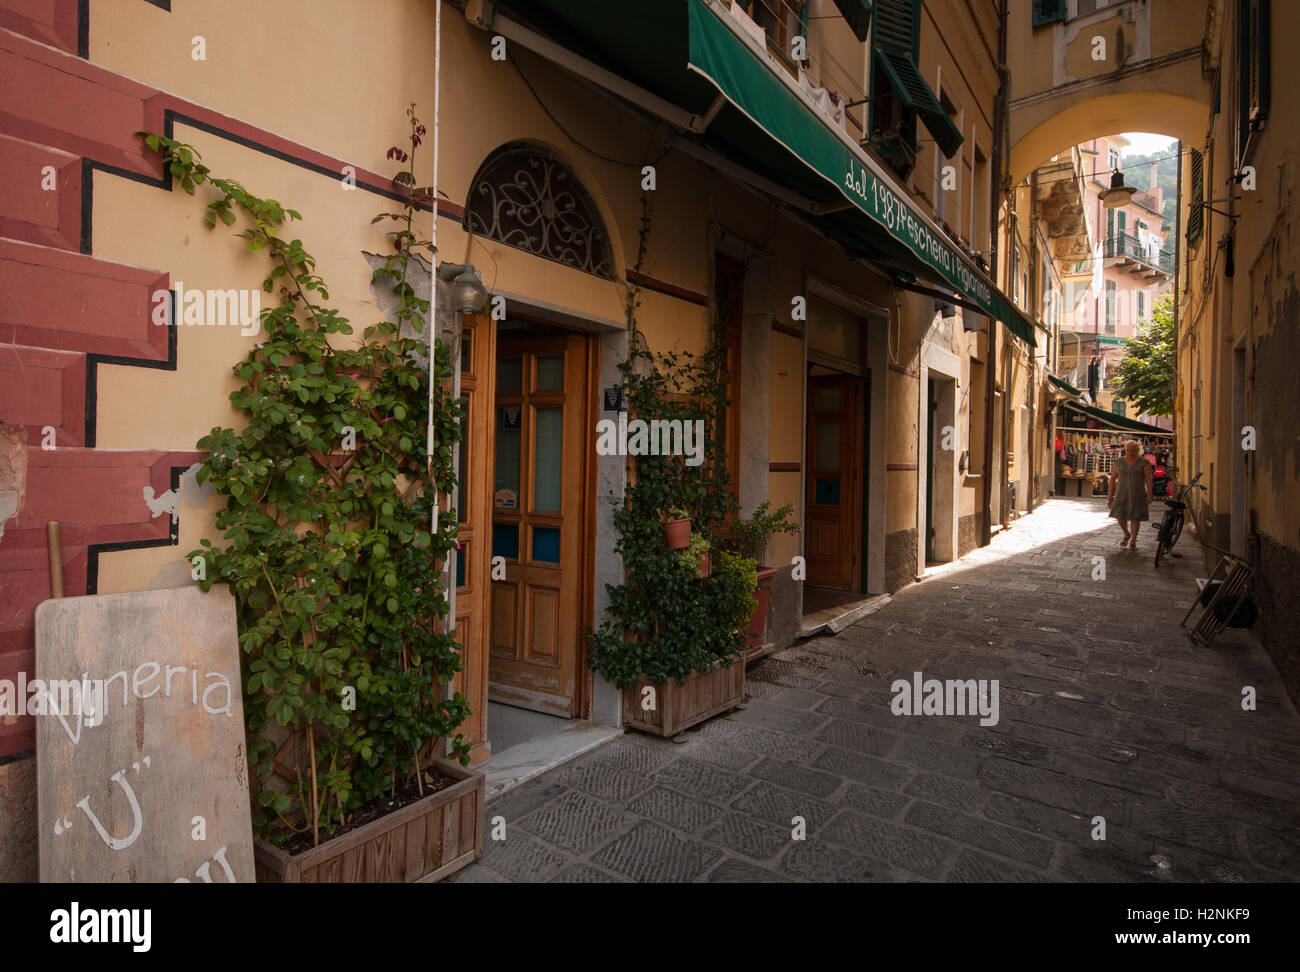 A shopfront in traditional architectural style and walkway, Cinque Terre, Italy, September Stock Photo